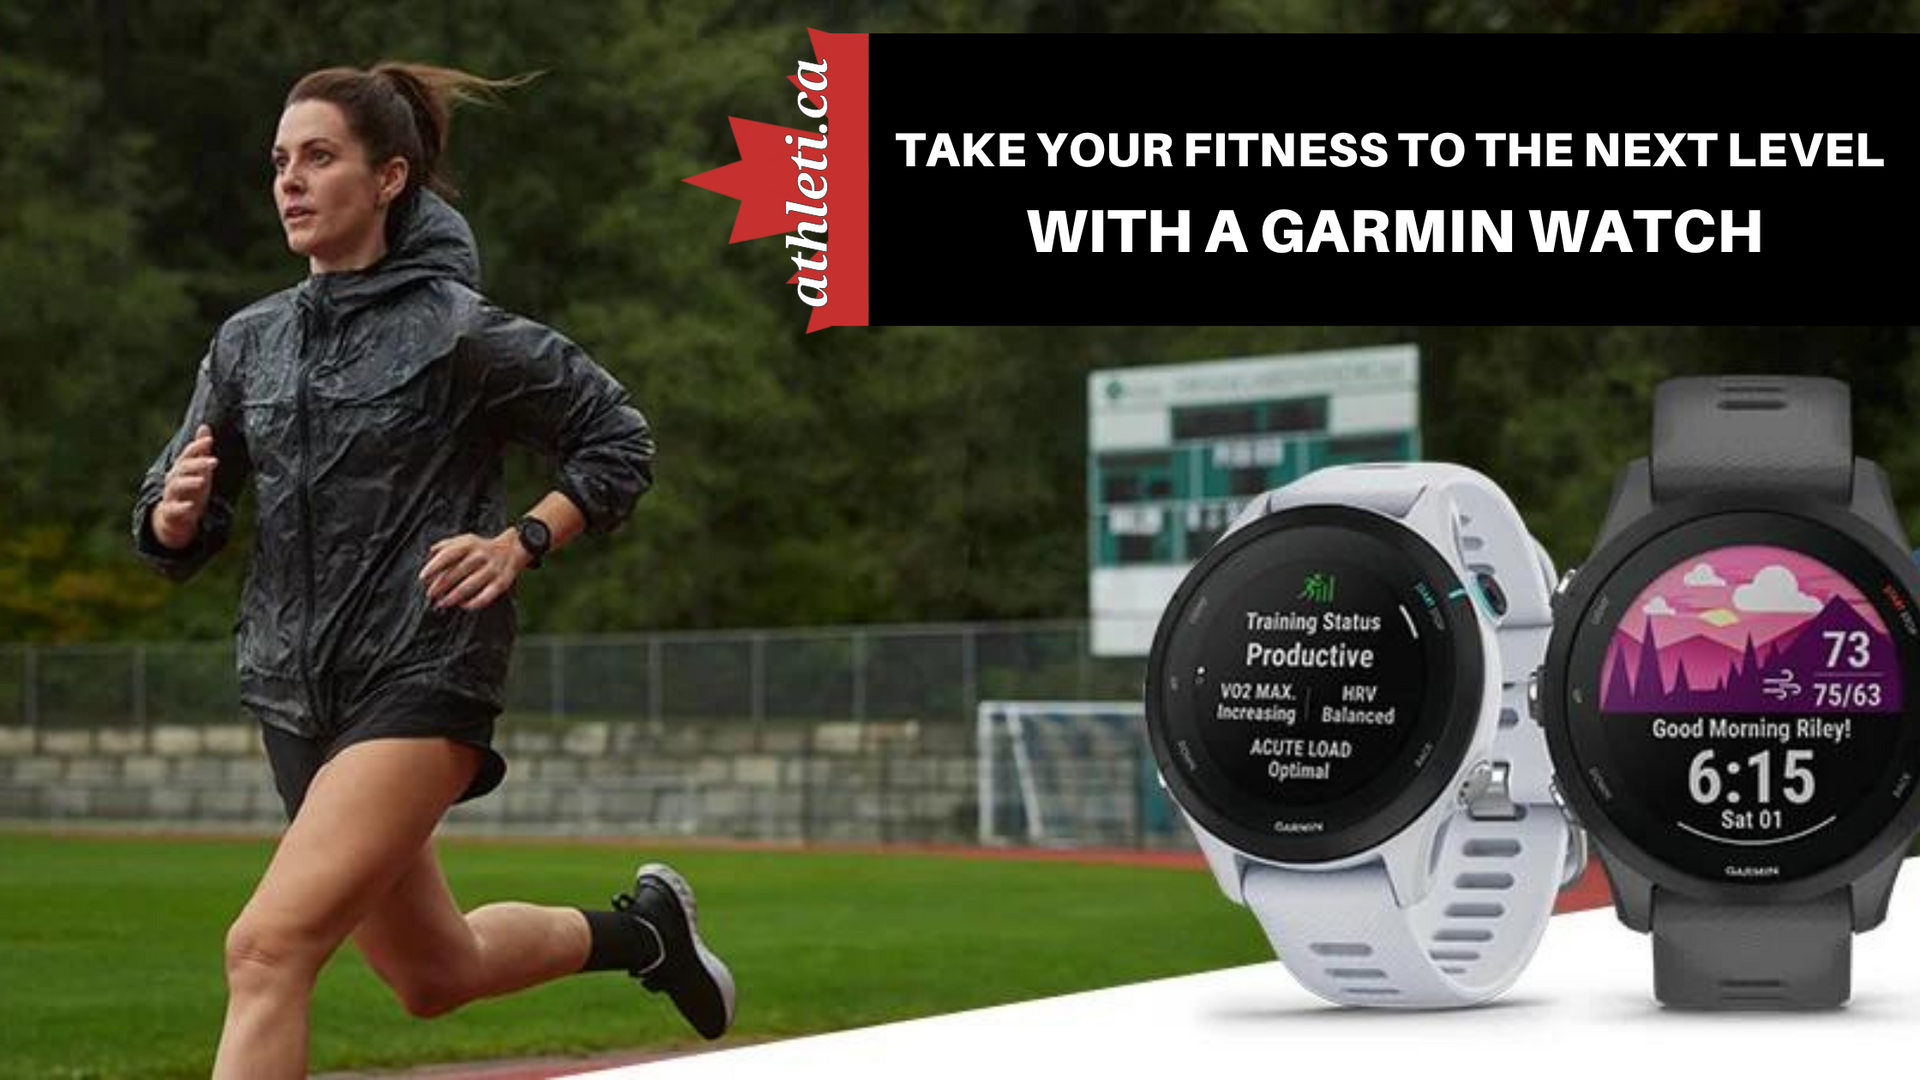 Take Your Fitness to the Next Level with a Garmin Watch